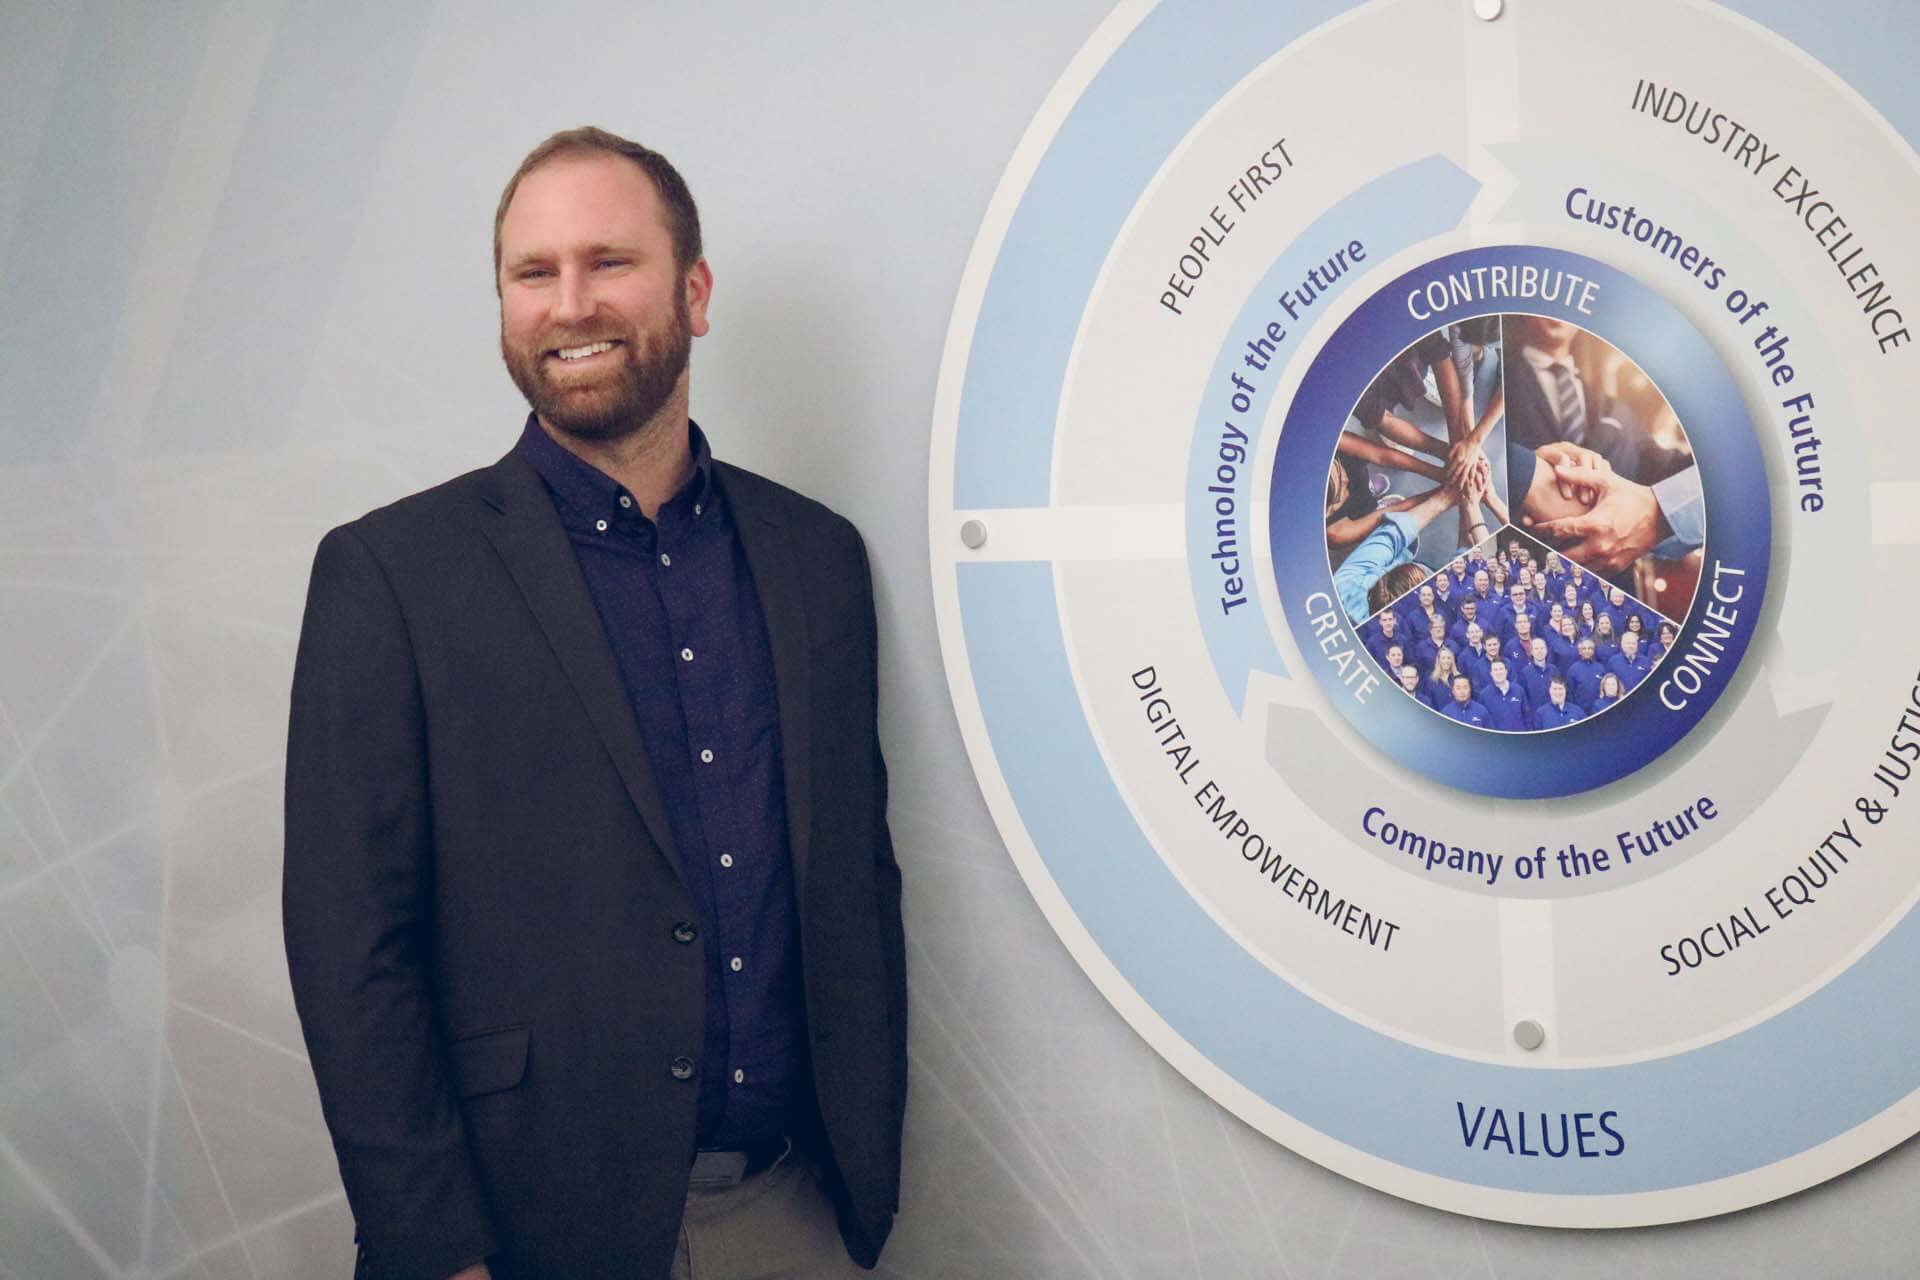 Stanley Consultants member standing near company values display